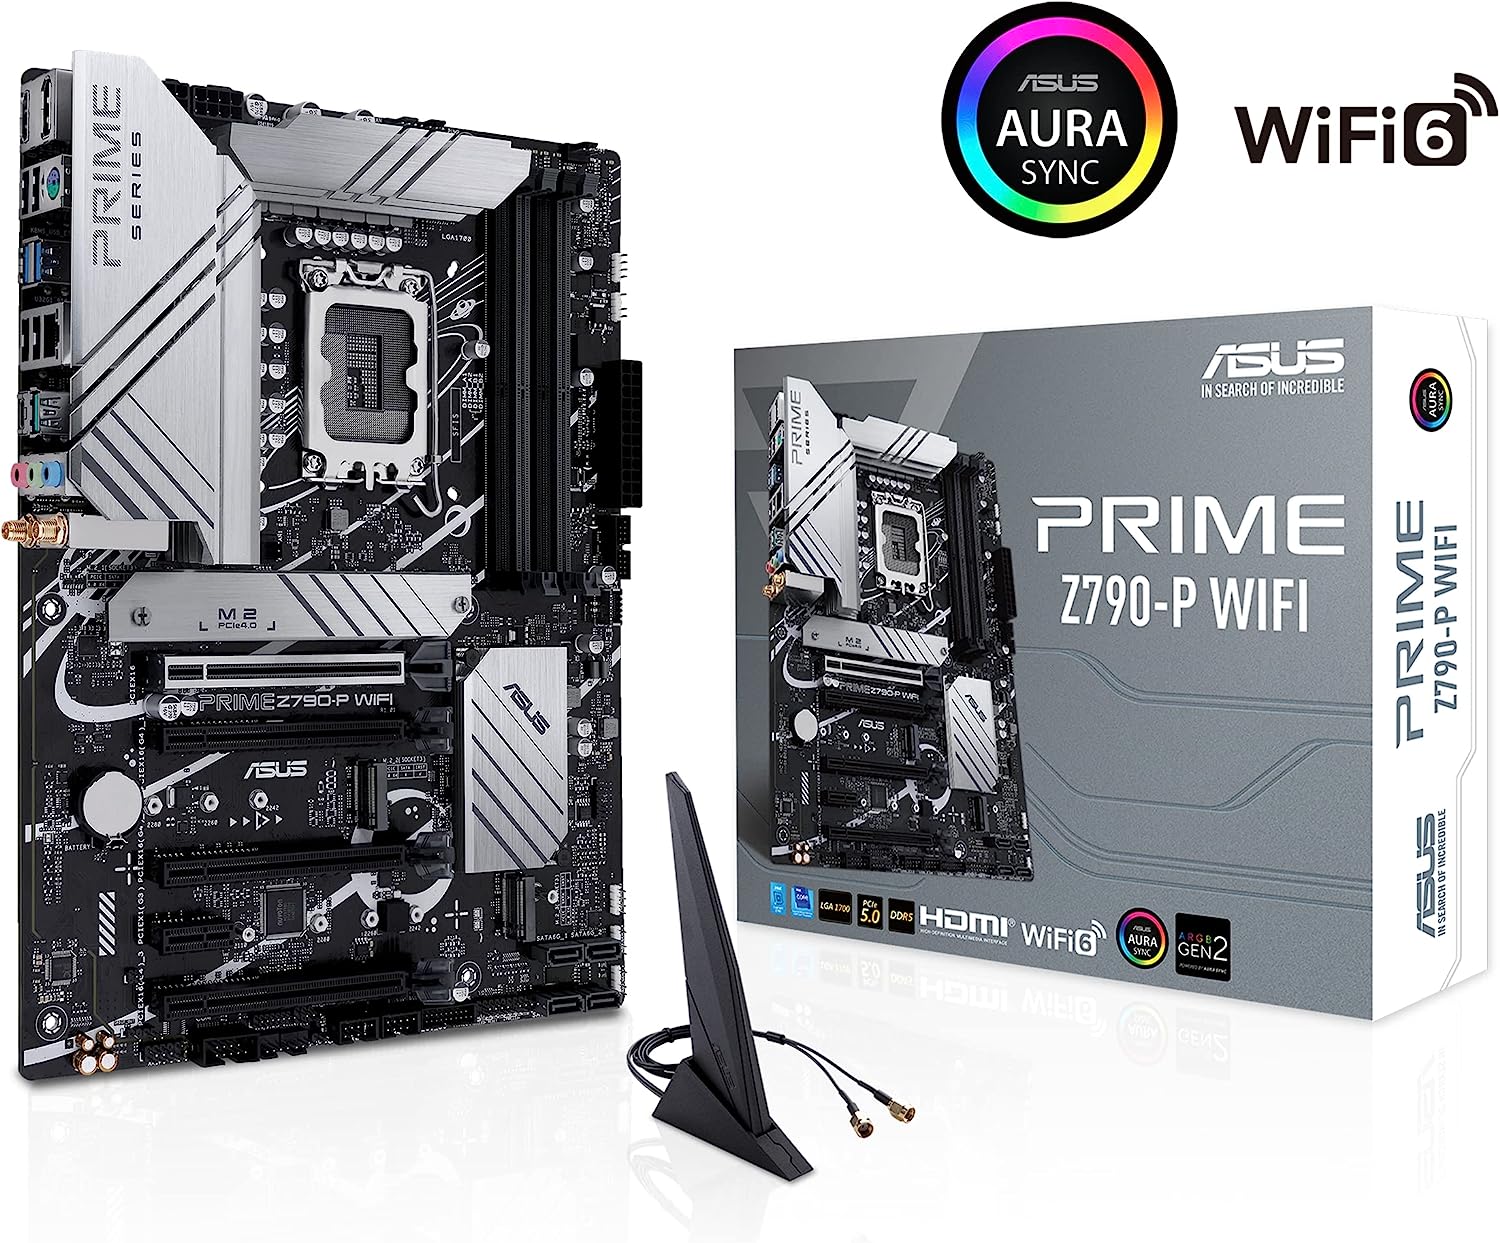 ASUS Prime Z790-P WiFi LGA 1700 ATX Motherboard: Reliable connectivity with WiFi 6, BT 5.2, 2.5Gb LAN, and Thunderbolt 4. 0195553937221